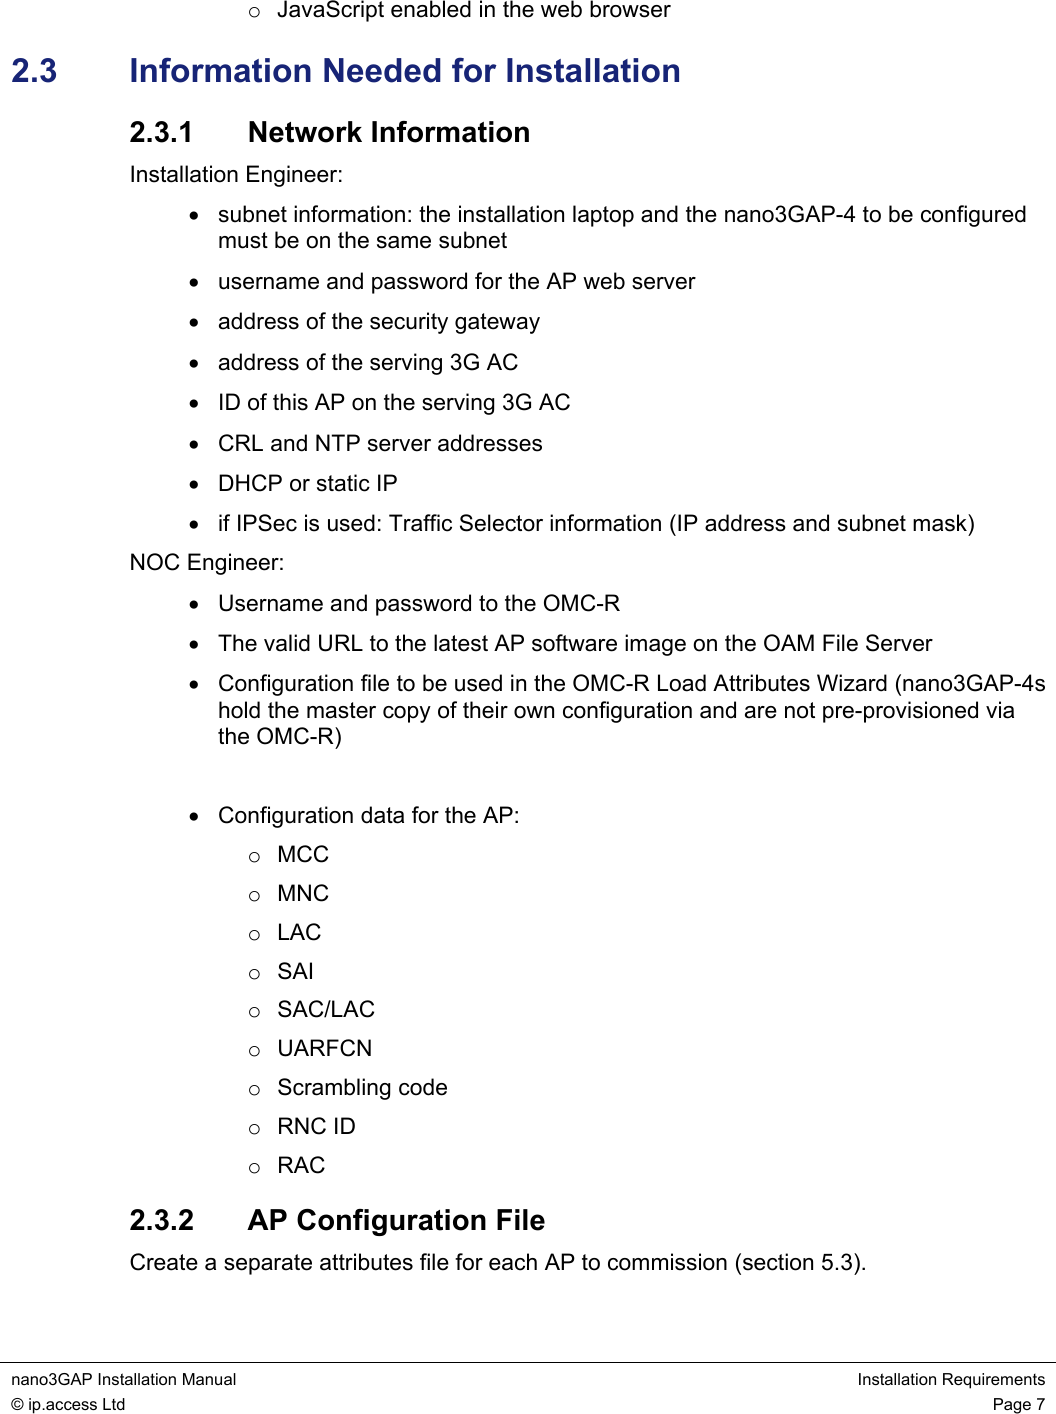  nano3GAP Installation Manual  Installation Requirements © ip.access Ltd  Page 7  o  JavaScript enabled in the web browser 2.3  Information Needed for Installation 2.3.1  Network Information Installation Engineer: •  subnet information: the installation laptop and the nano3GAP-4 to be configured must be on the same subnet •  username and password for the AP web server •  address of the security gateway •  address of the serving 3G AC •  ID of this AP on the serving 3G AC •  CRL and NTP server addresses •  DHCP or static IP •  if IPSec is used: Traffic Selector information (IP address and subnet mask) NOC Engineer: •  Username and password to the OMC-R •  The valid URL to the latest AP software image on the OAM File Server •  Configuration file to be used in the OMC-R Load Attributes Wizard (nano3GAP-4s hold the master copy of their own configuration and are not pre-provisioned via the OMC-R)  •  Configuration data for the AP: o MCC o MNC o LAC o SAI o SAC/LAC o UARFCN o Scrambling code o RNC ID o RAC 2.3.2  AP Configuration File Create a separate attributes file for each AP to commission (section 5.3). 